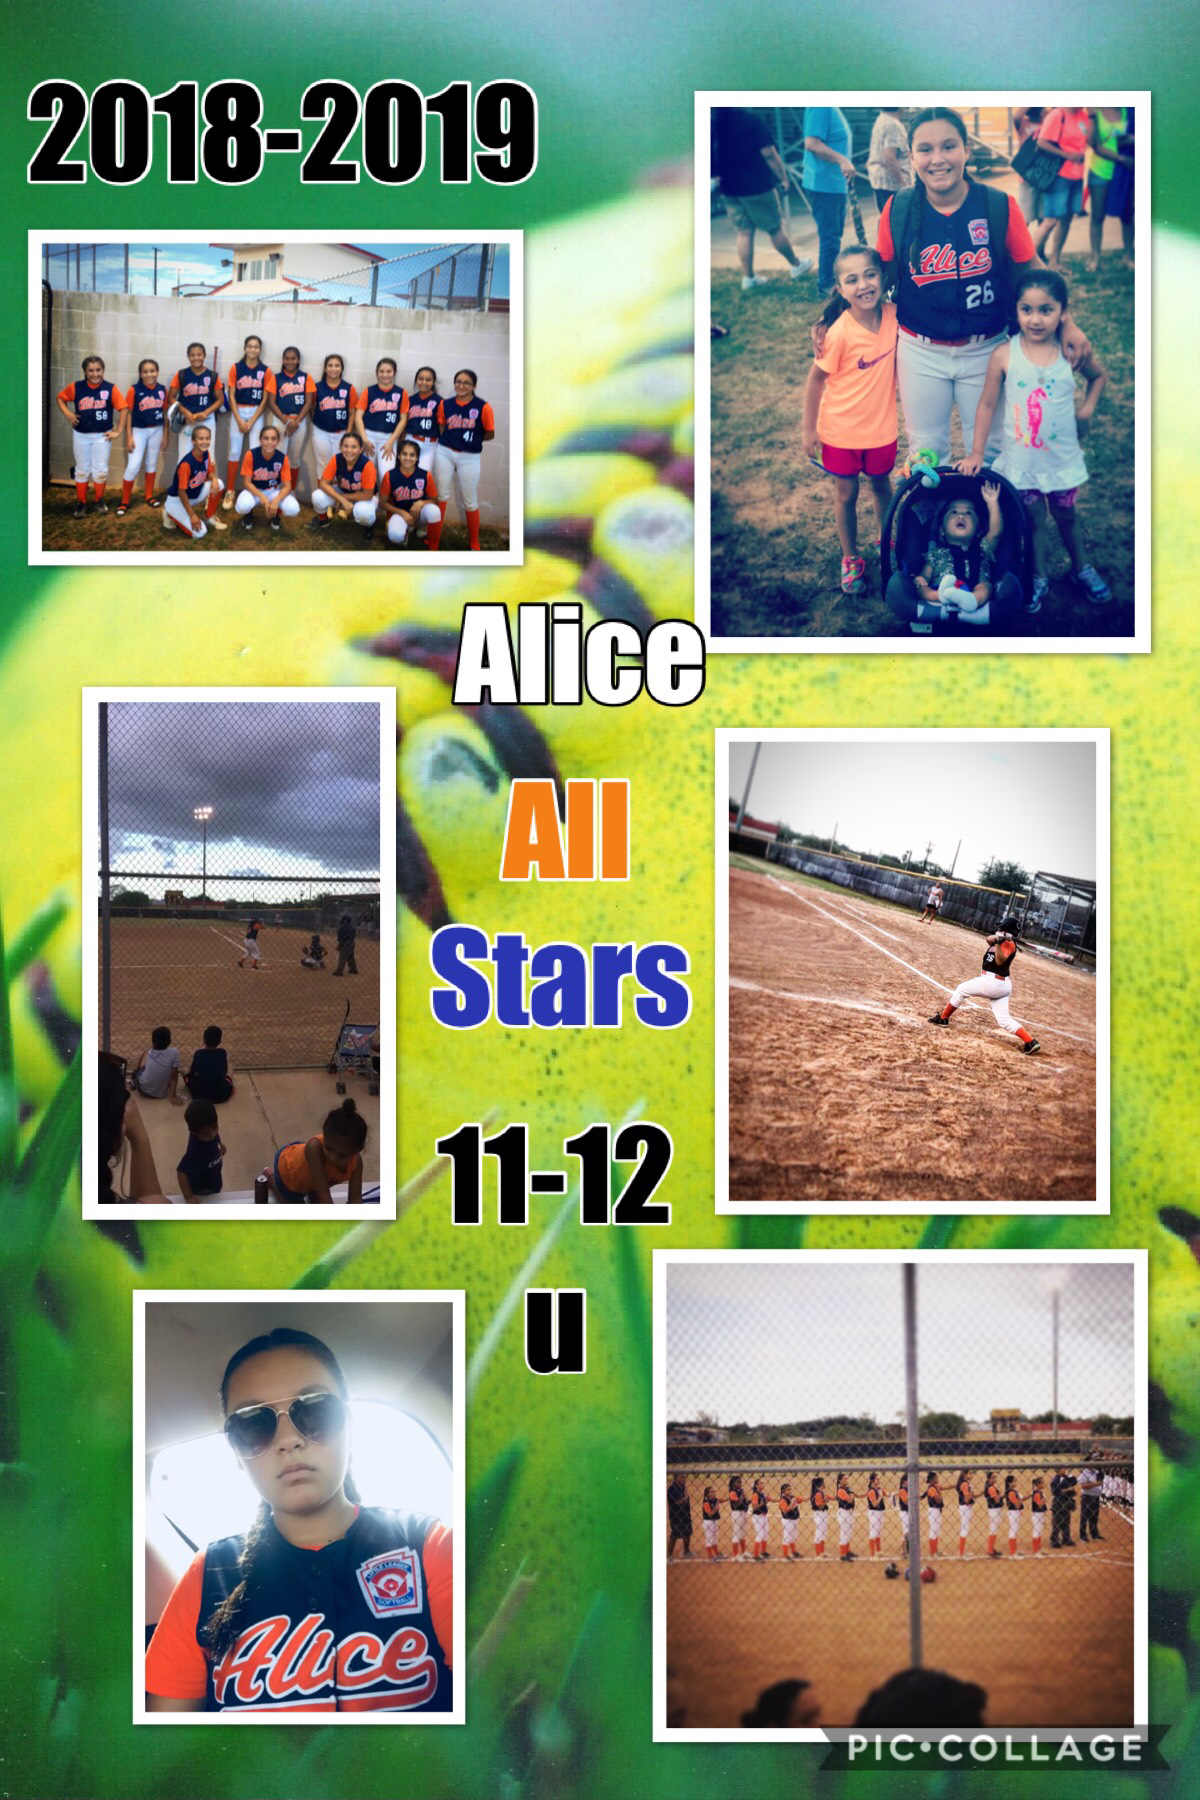 Support me and my team in the STATE OF TEXAS ALL STAR SOFTBALL TOURNAMENT 